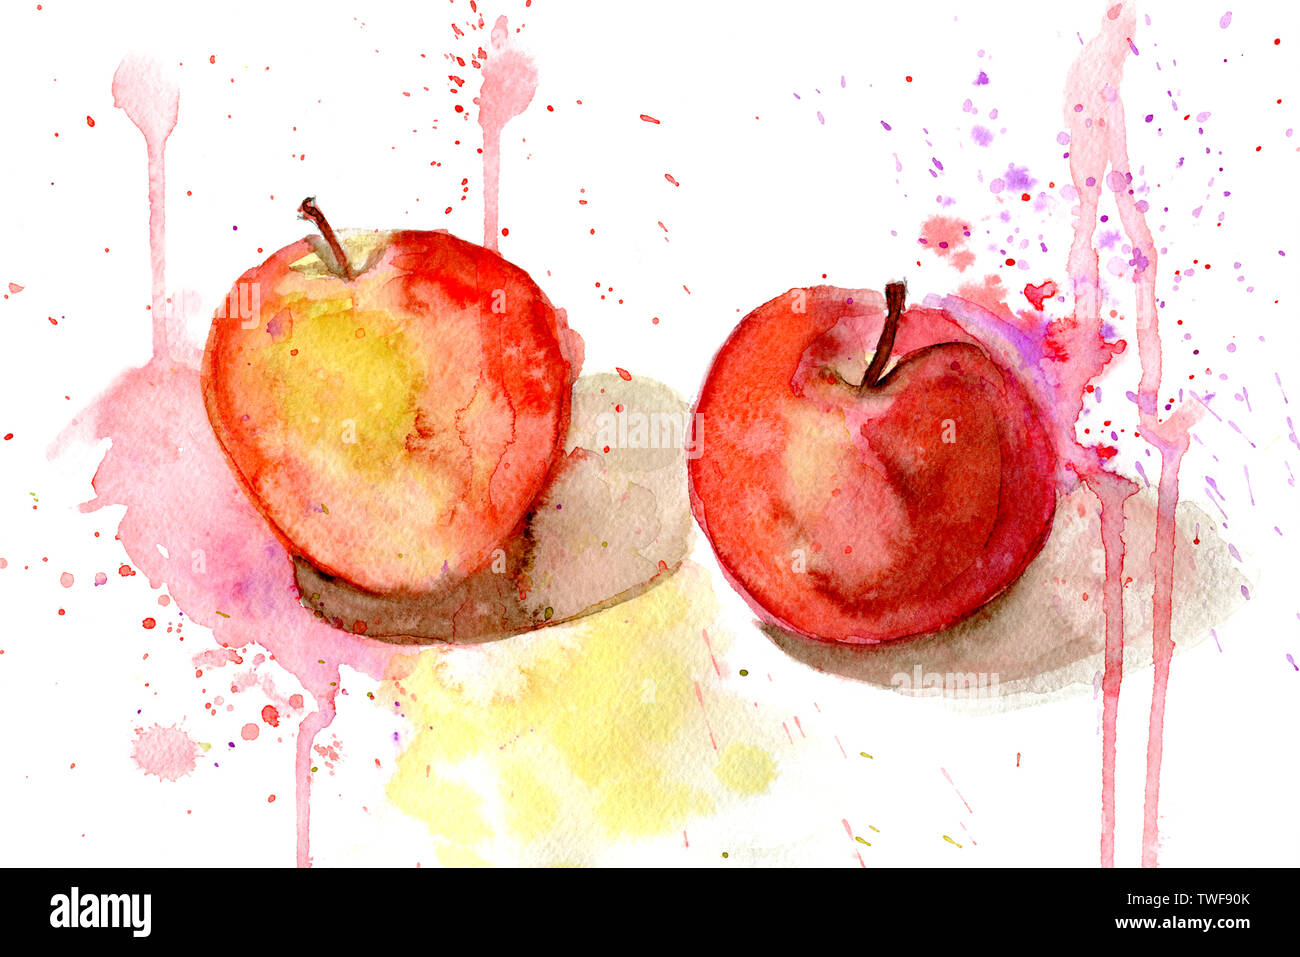 Hand drawn watercolor painting of two red apples with splashes on white background. Stock Photo